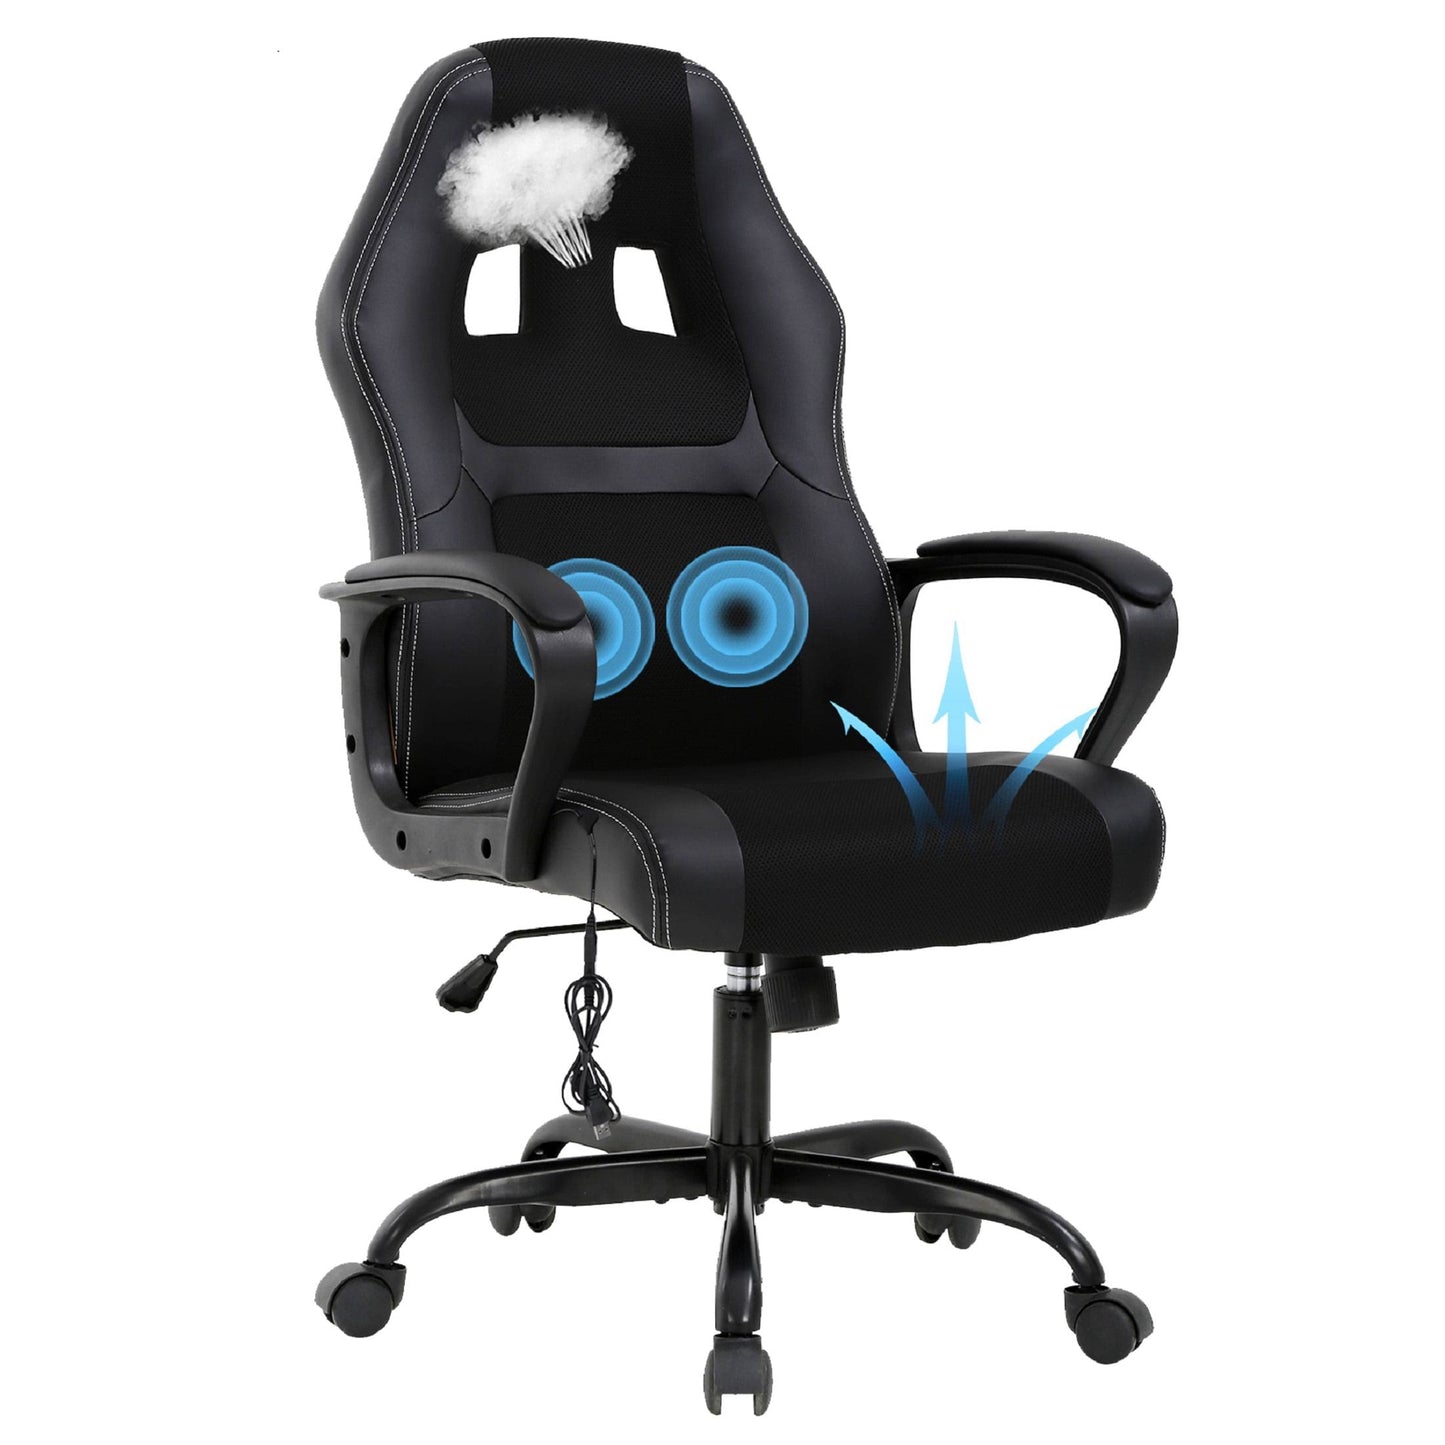 Massage Gaming Chair For Adults Pu Leather Adjustable Computer Chair Ergonomic High-Back Video Game Chiar With Lumbar Support Swivel